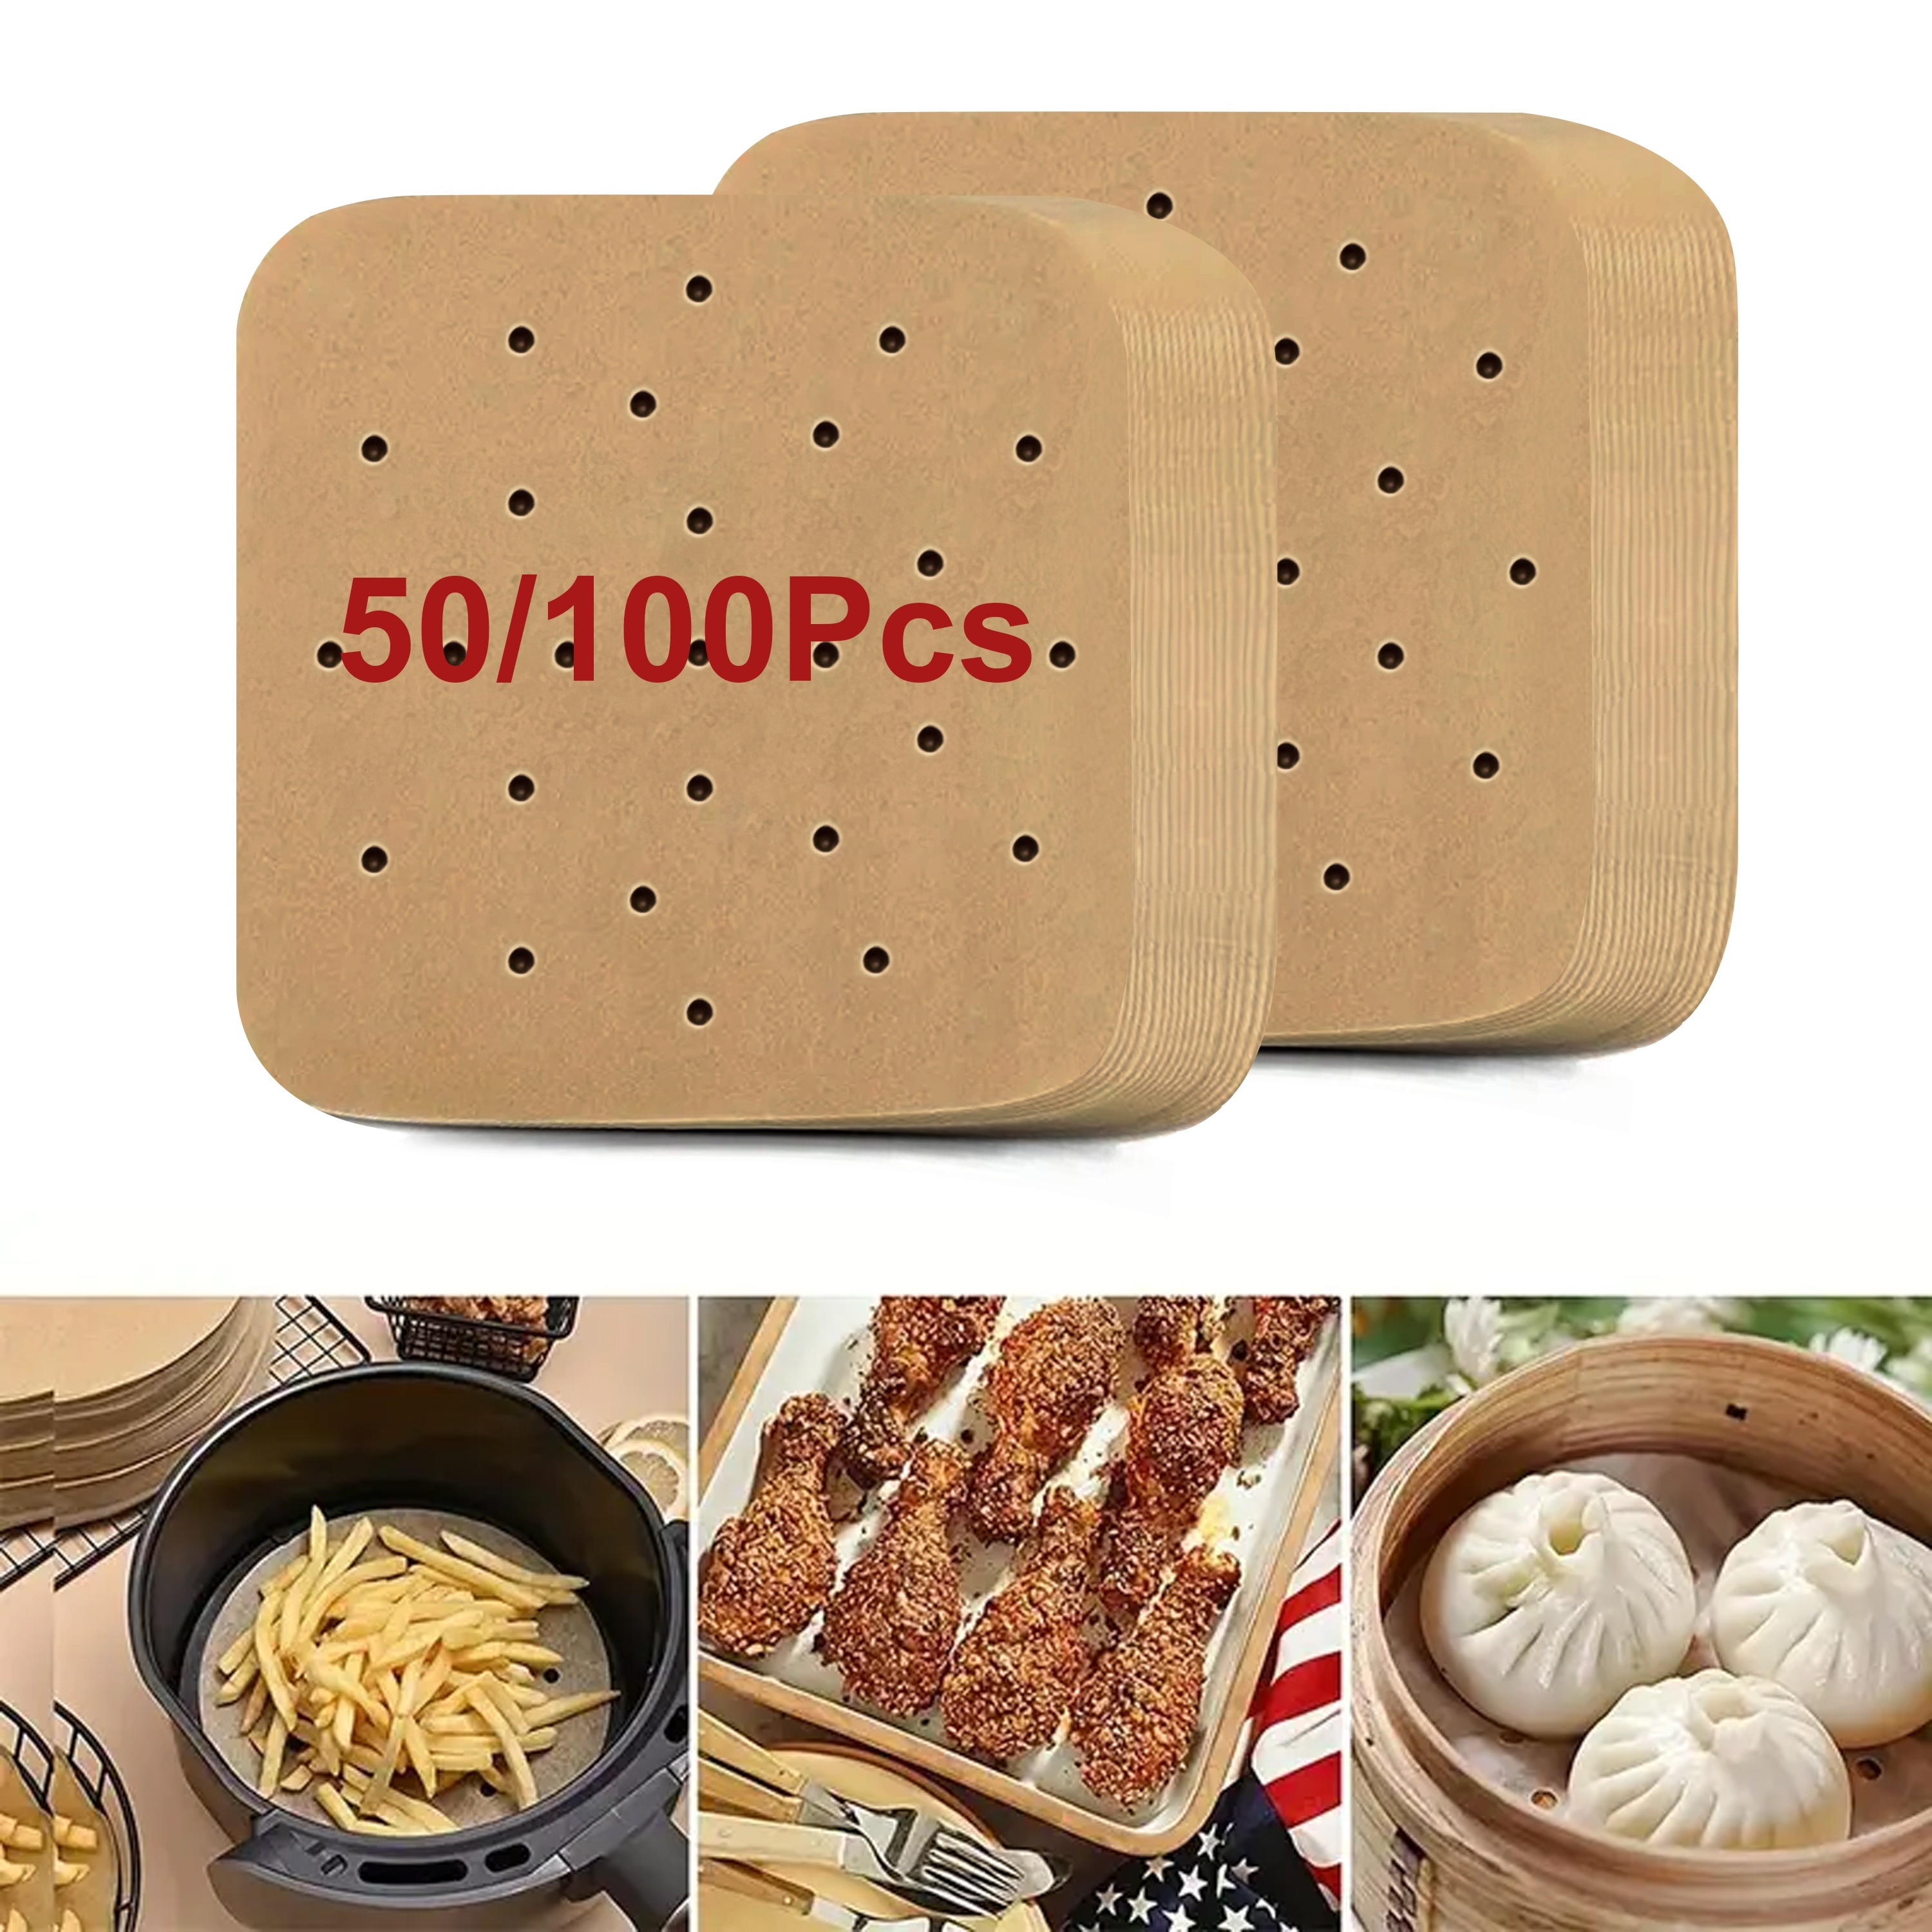 

50/100pcs Perforated Parchment Paper Sheets For Baking, 20/21.5cm, Brown Square Air Fryer Parchment Paper Liners For Steaming Basket, Oven, Cooking, And Baking Eid Al-adha Mubarak